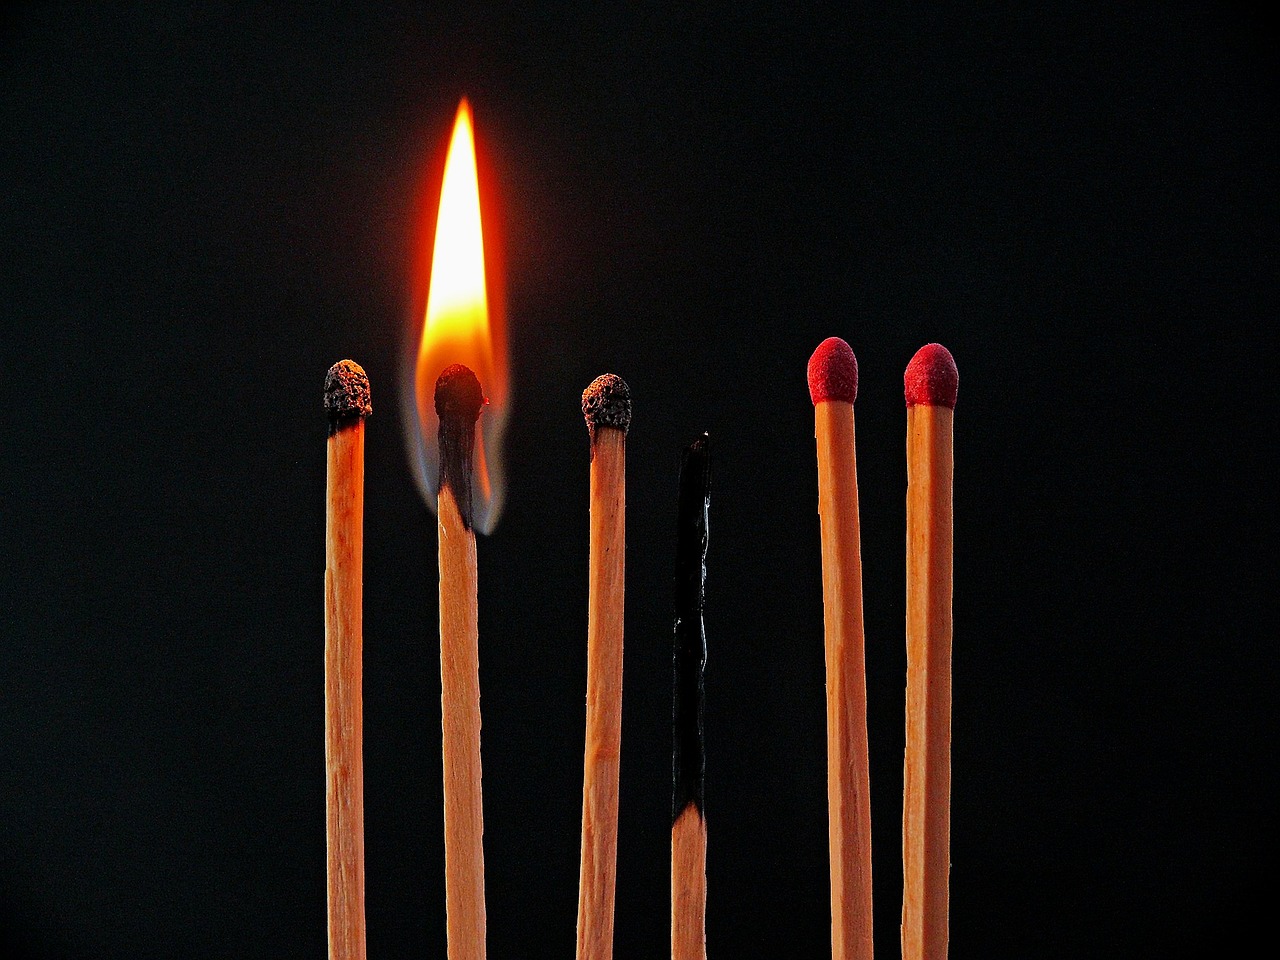 Burnout: SEVEN ACTIONS FOR NON-PROFIT LEADERS TO COMBAT BURNOUT IN THEIR STAFF TEAM